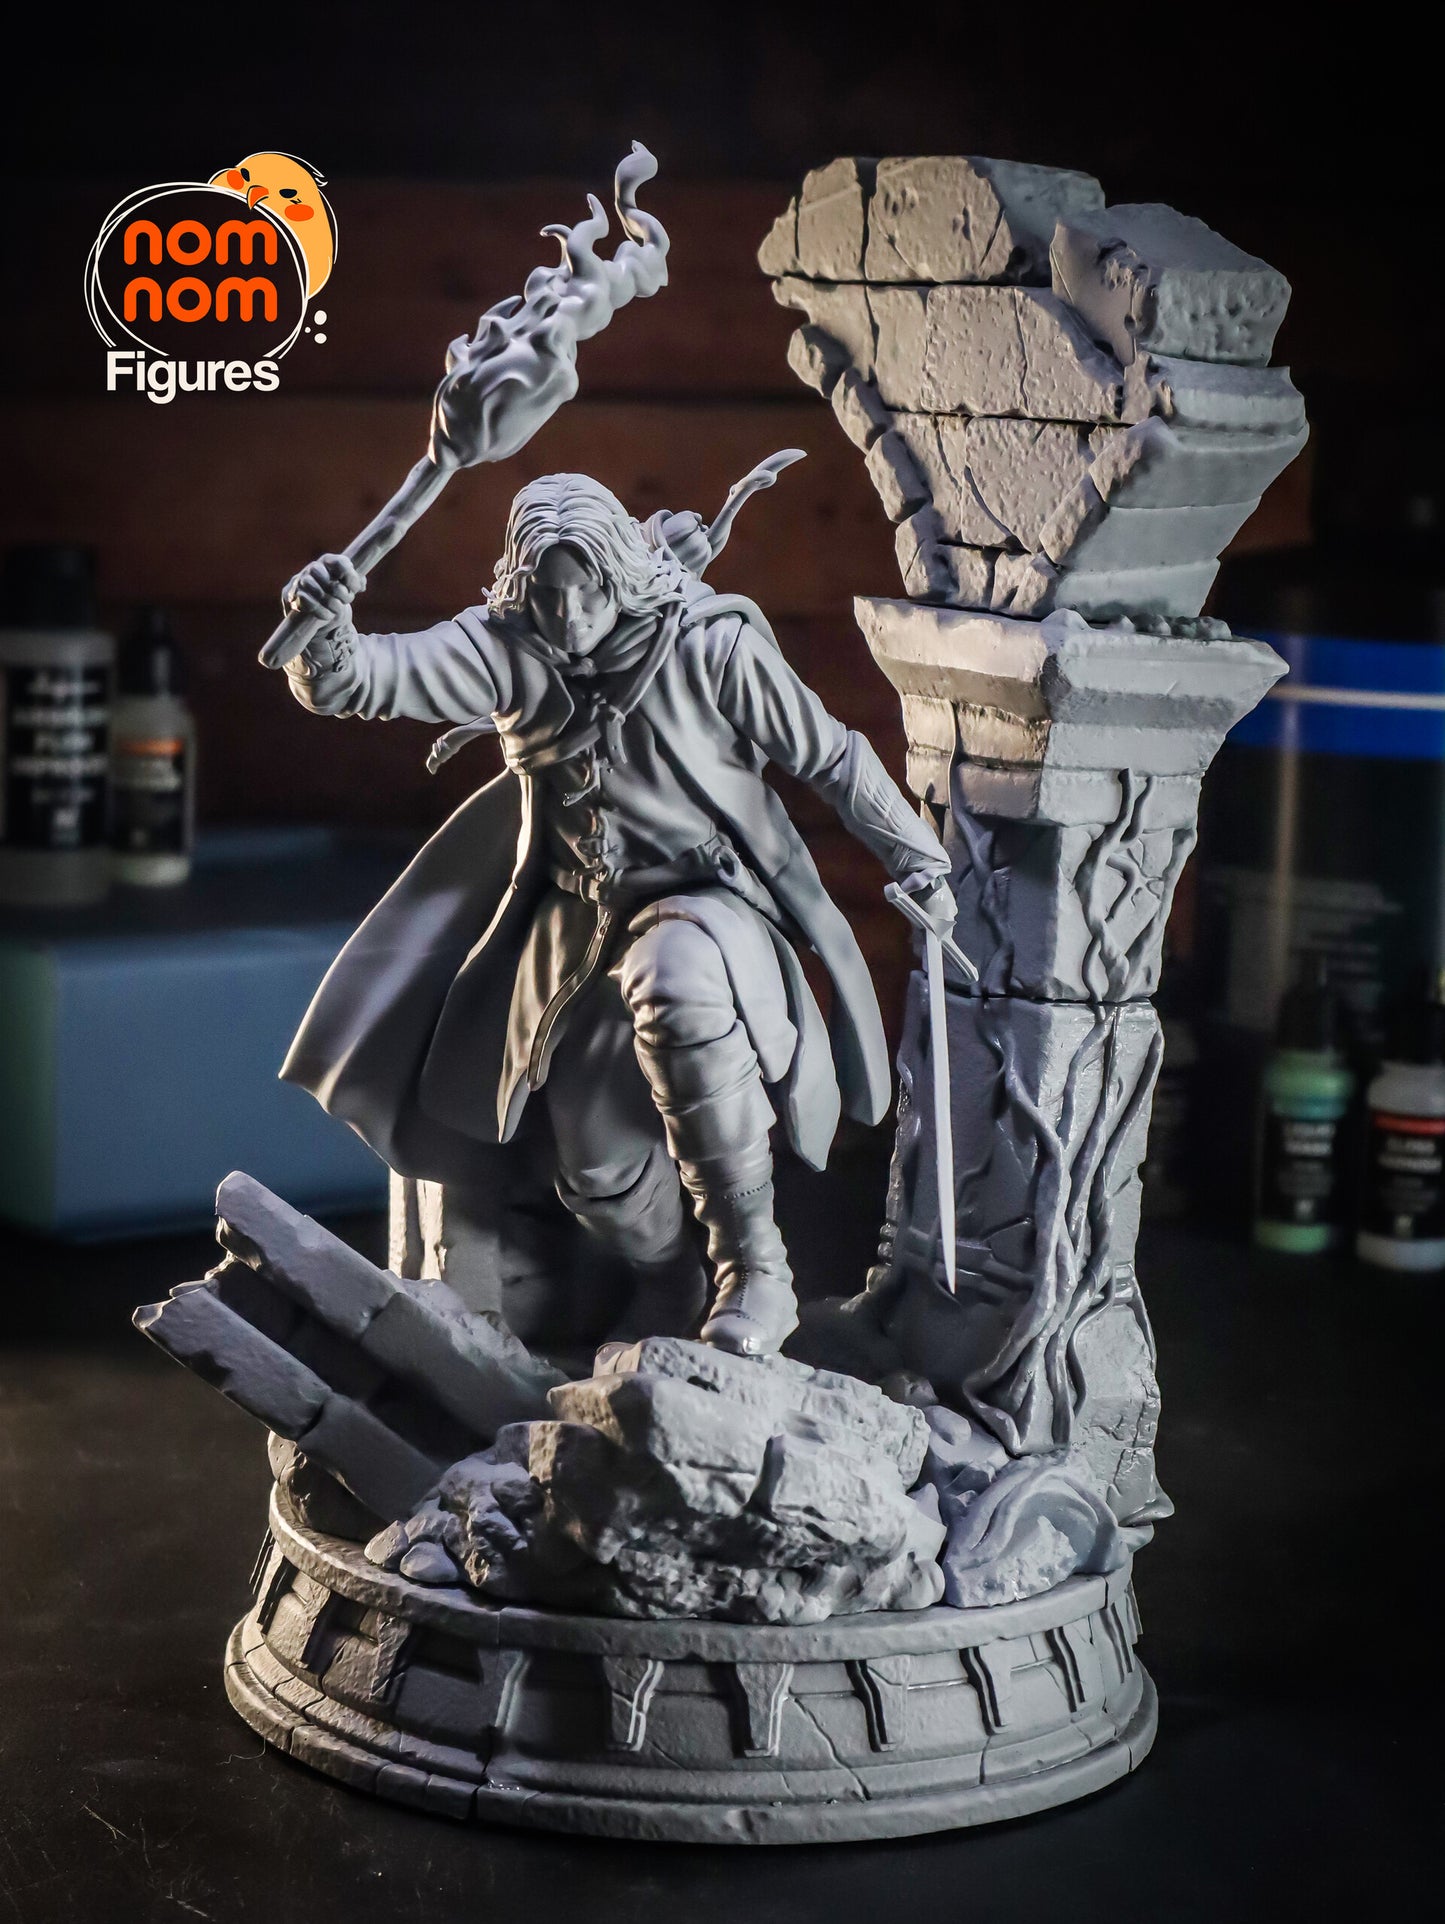 Aragorn - Lord of the Rings 3D Printed Fanmade Model by Nomnom Figures